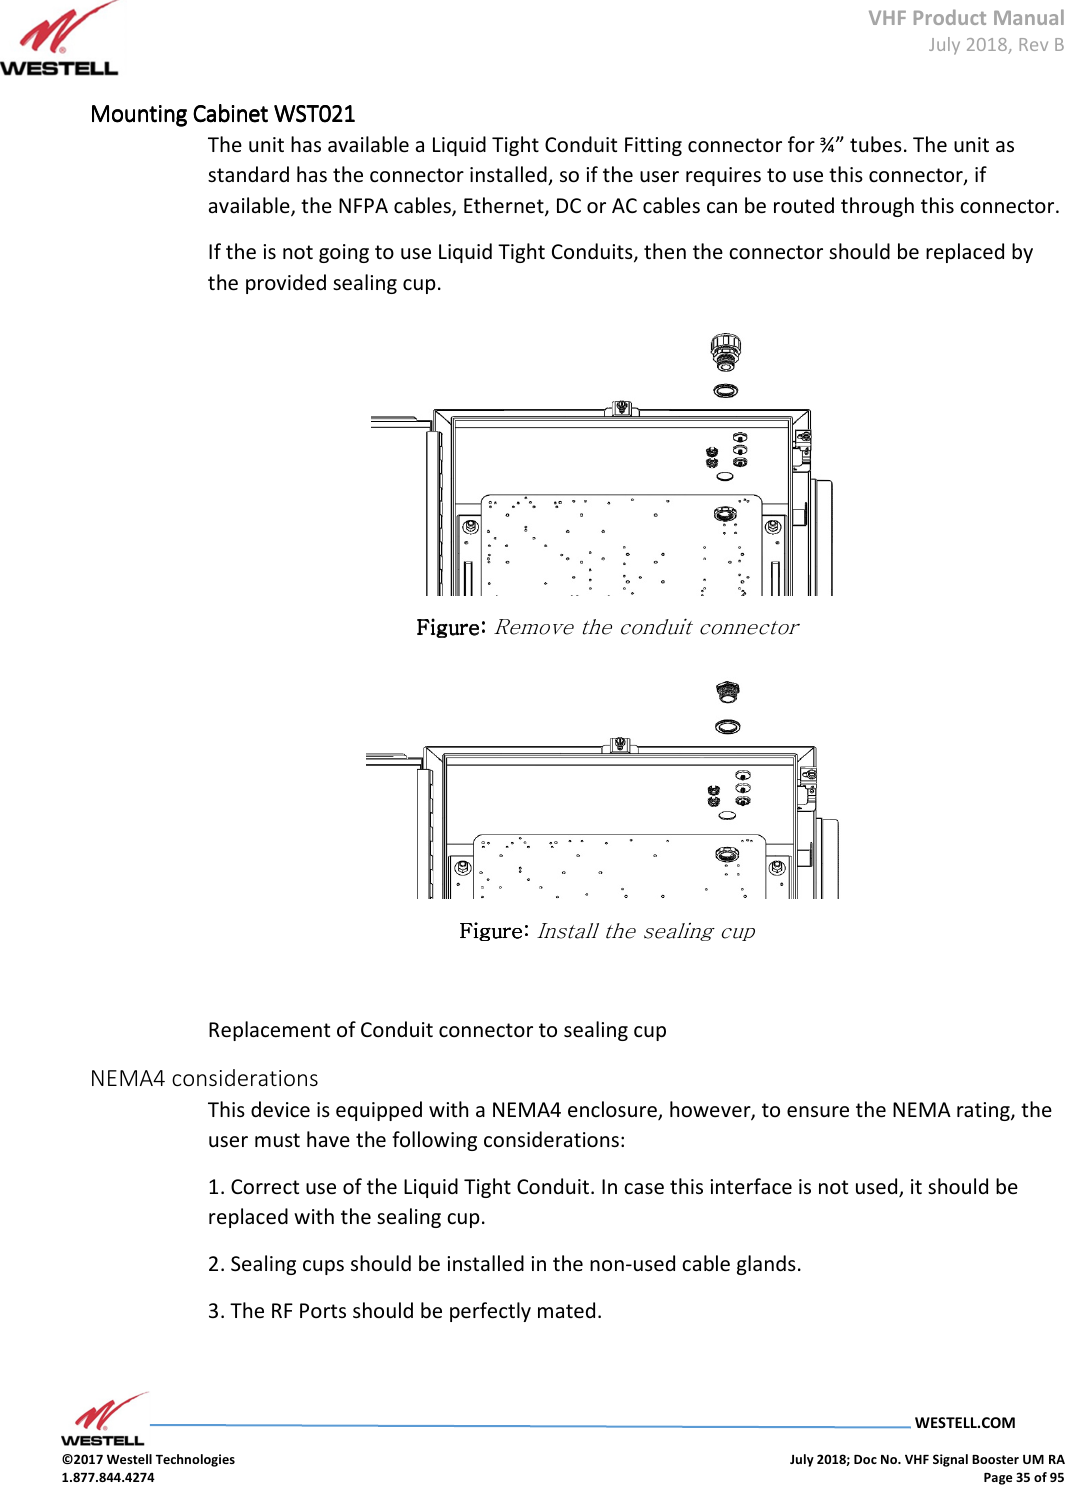 VHF Product Manual July 2018, Rev B   WESTELL.COM  ©2017 Westell Technologies    July 2018; Doc No. VHF Signal Booster UM RA 1.877.844.4274    Page 35 of 95  Mounting Cabinet Mounting Cabinet Mounting Cabinet Mounting Cabinet WST021WST021WST021WST021    The unit has available a Liquid Tight Conduit Fitting connector for ¾” tubes. The unit as standard has the connector installed, so if the user requires to use this connector, if available, the NFPA cables, Ethernet, DC or AC cables can be routed through this connector. If the is not going to use Liquid Tight Conduits, then the connector should be replaced by the provided sealing cup.  Figure: Figure: Figure: Figure: Remove the conduit connector  FigureFigureFigureFigure: : : : Install the sealing cup  Replacement of Conduit connector to sealing cup NEMA4 considerations This device is equipped with a NEMA4 enclosure, however, to ensure the NEMA rating, the user must have the following considerations: 1. Correct use of the Liquid Tight Conduit. In case this interface is not used, it should be replaced with the sealing cup. 2. Sealing cups should be installed in the non-used cable glands. 3. The RF Ports should be perfectly mated.  